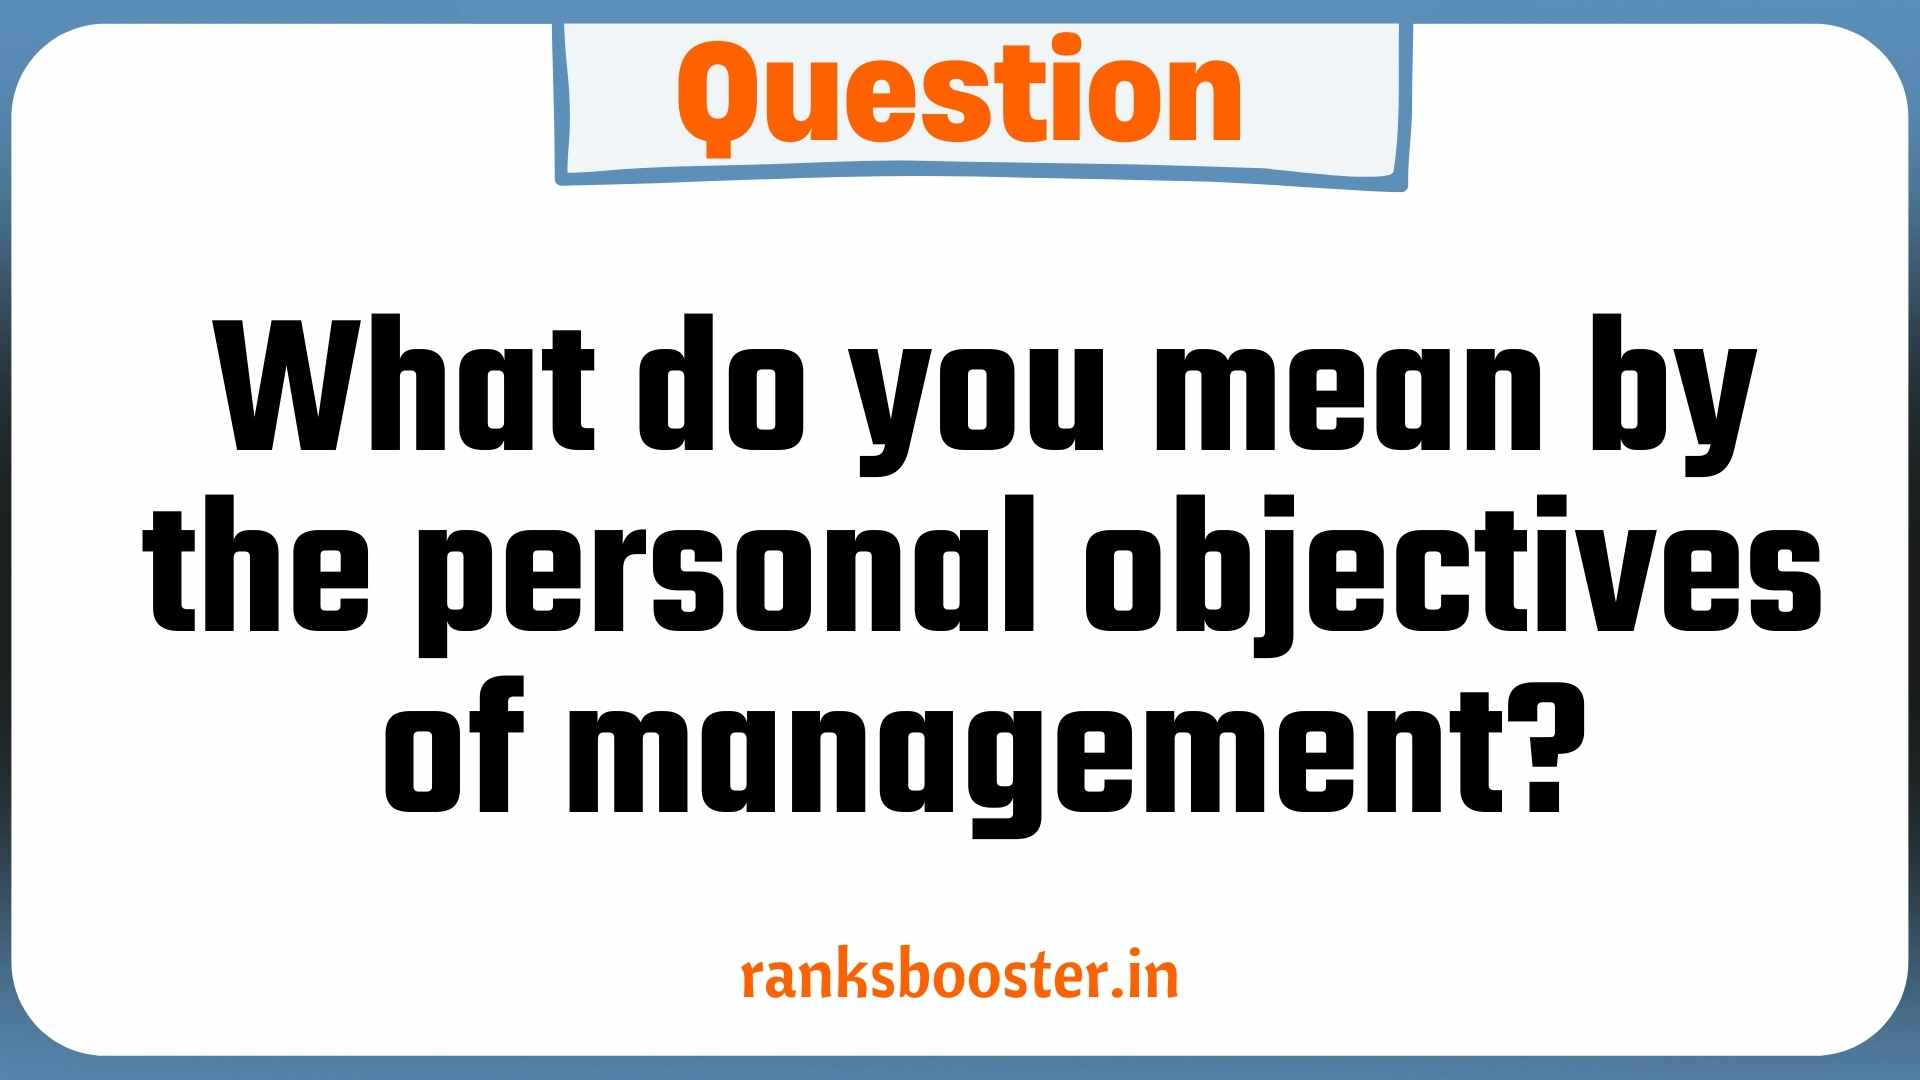 Question: What do you mean by the personal objectives of management?